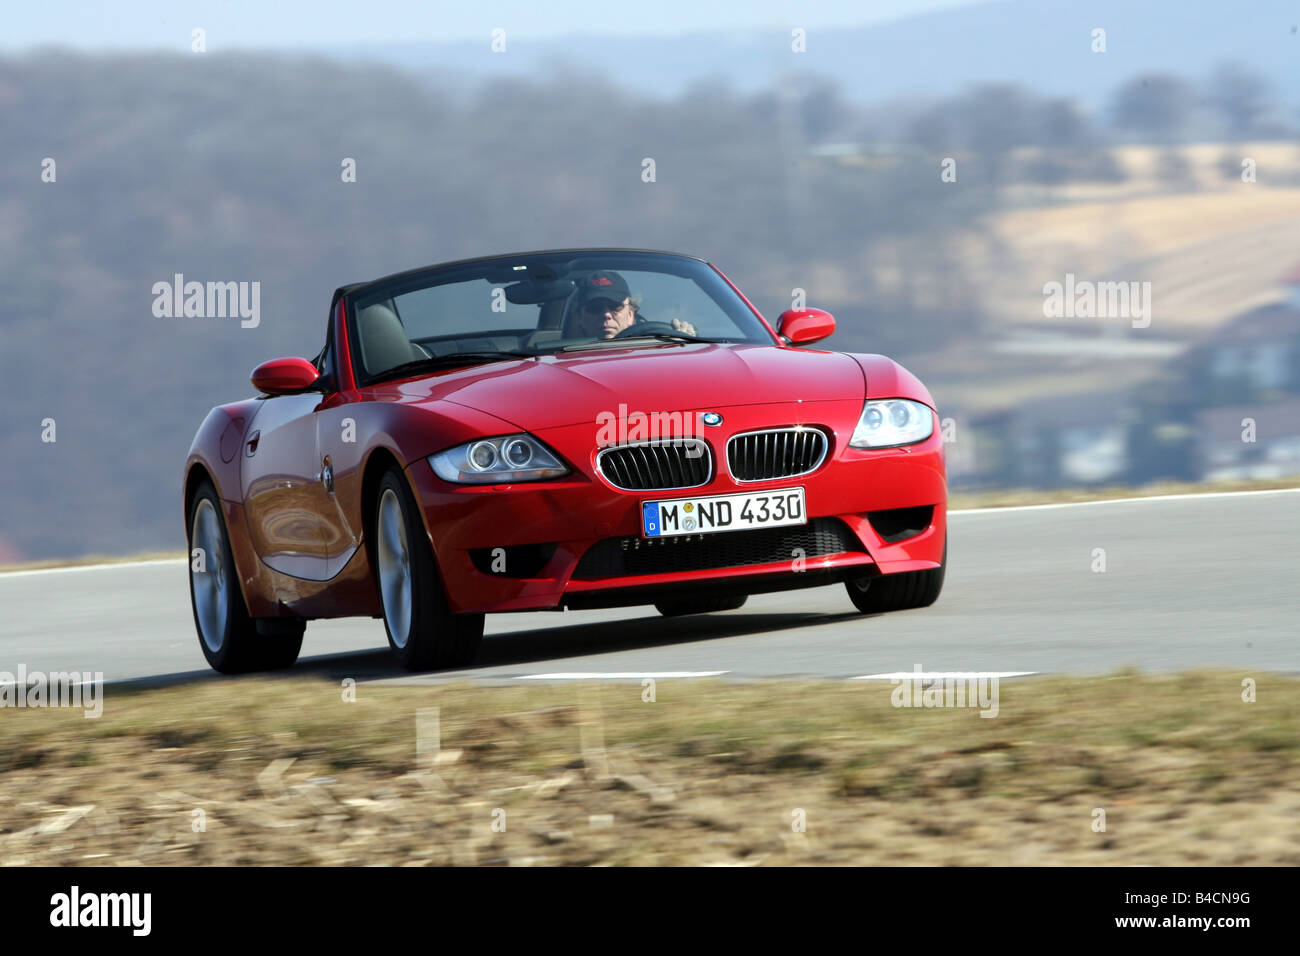 Bmw Z4 M High Resolution Stock Photography and Images - Alamy